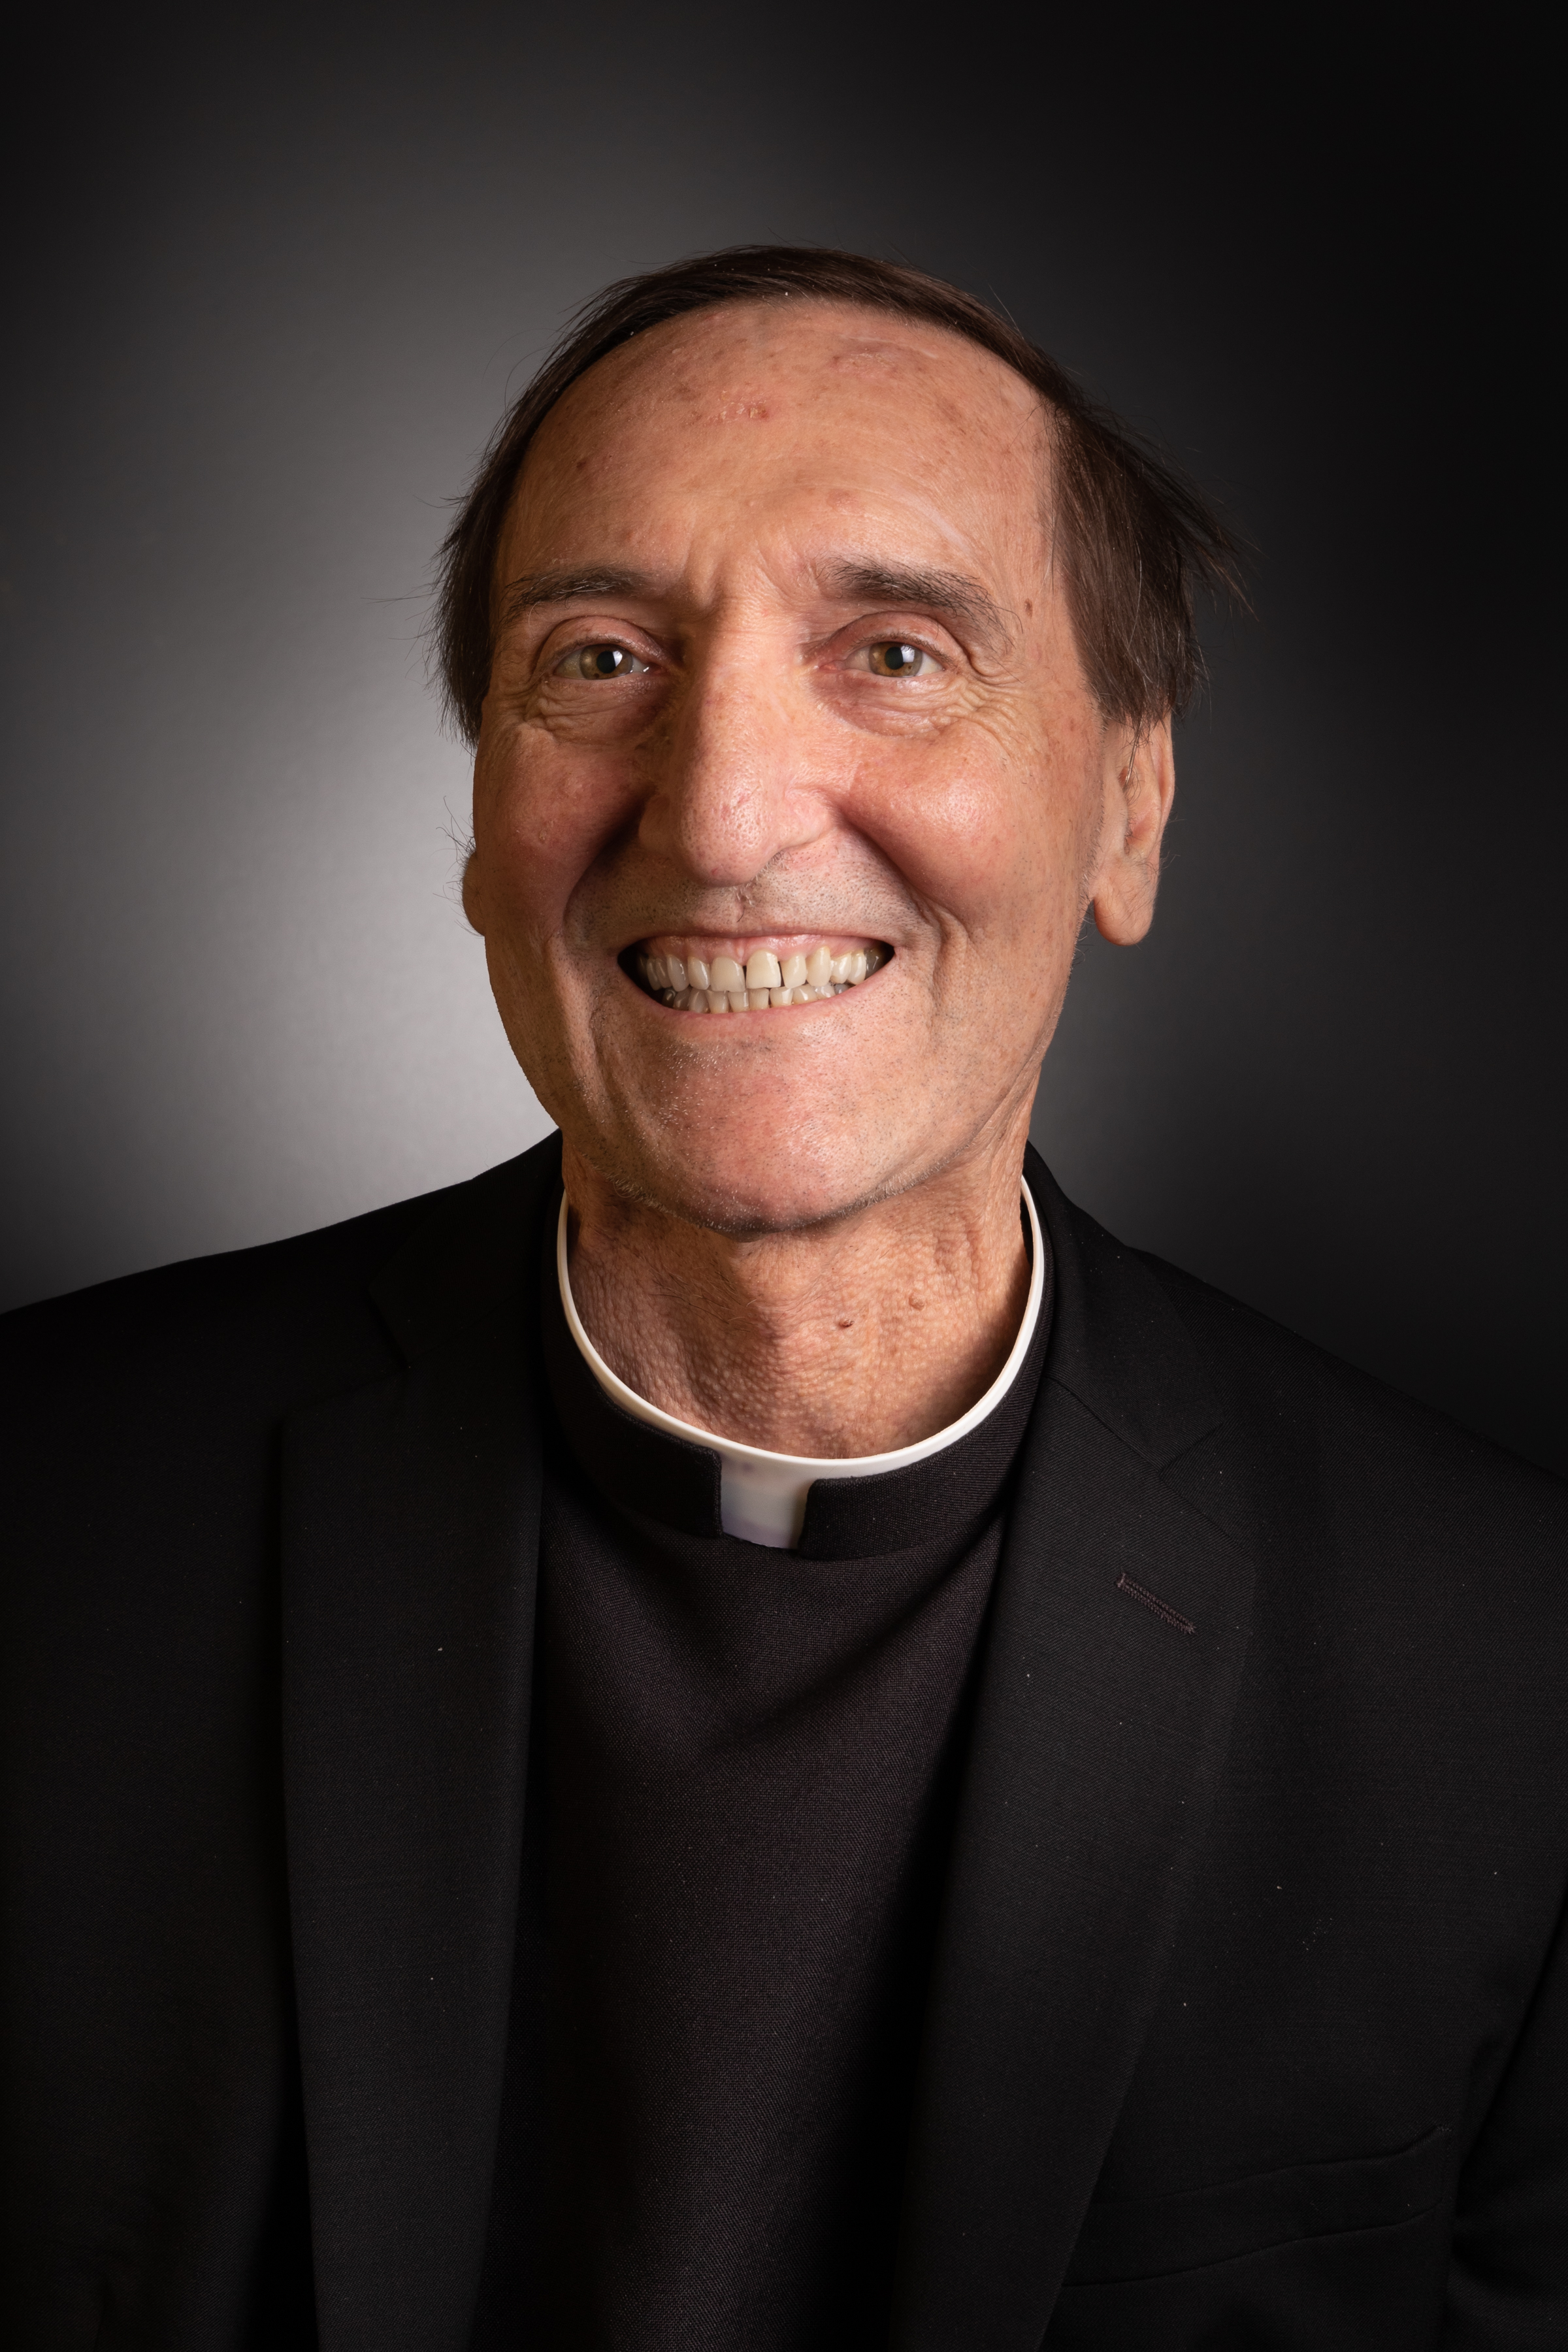 Obituary | Fr. James T. Edwards | Articles | Archdiocese of St Louis